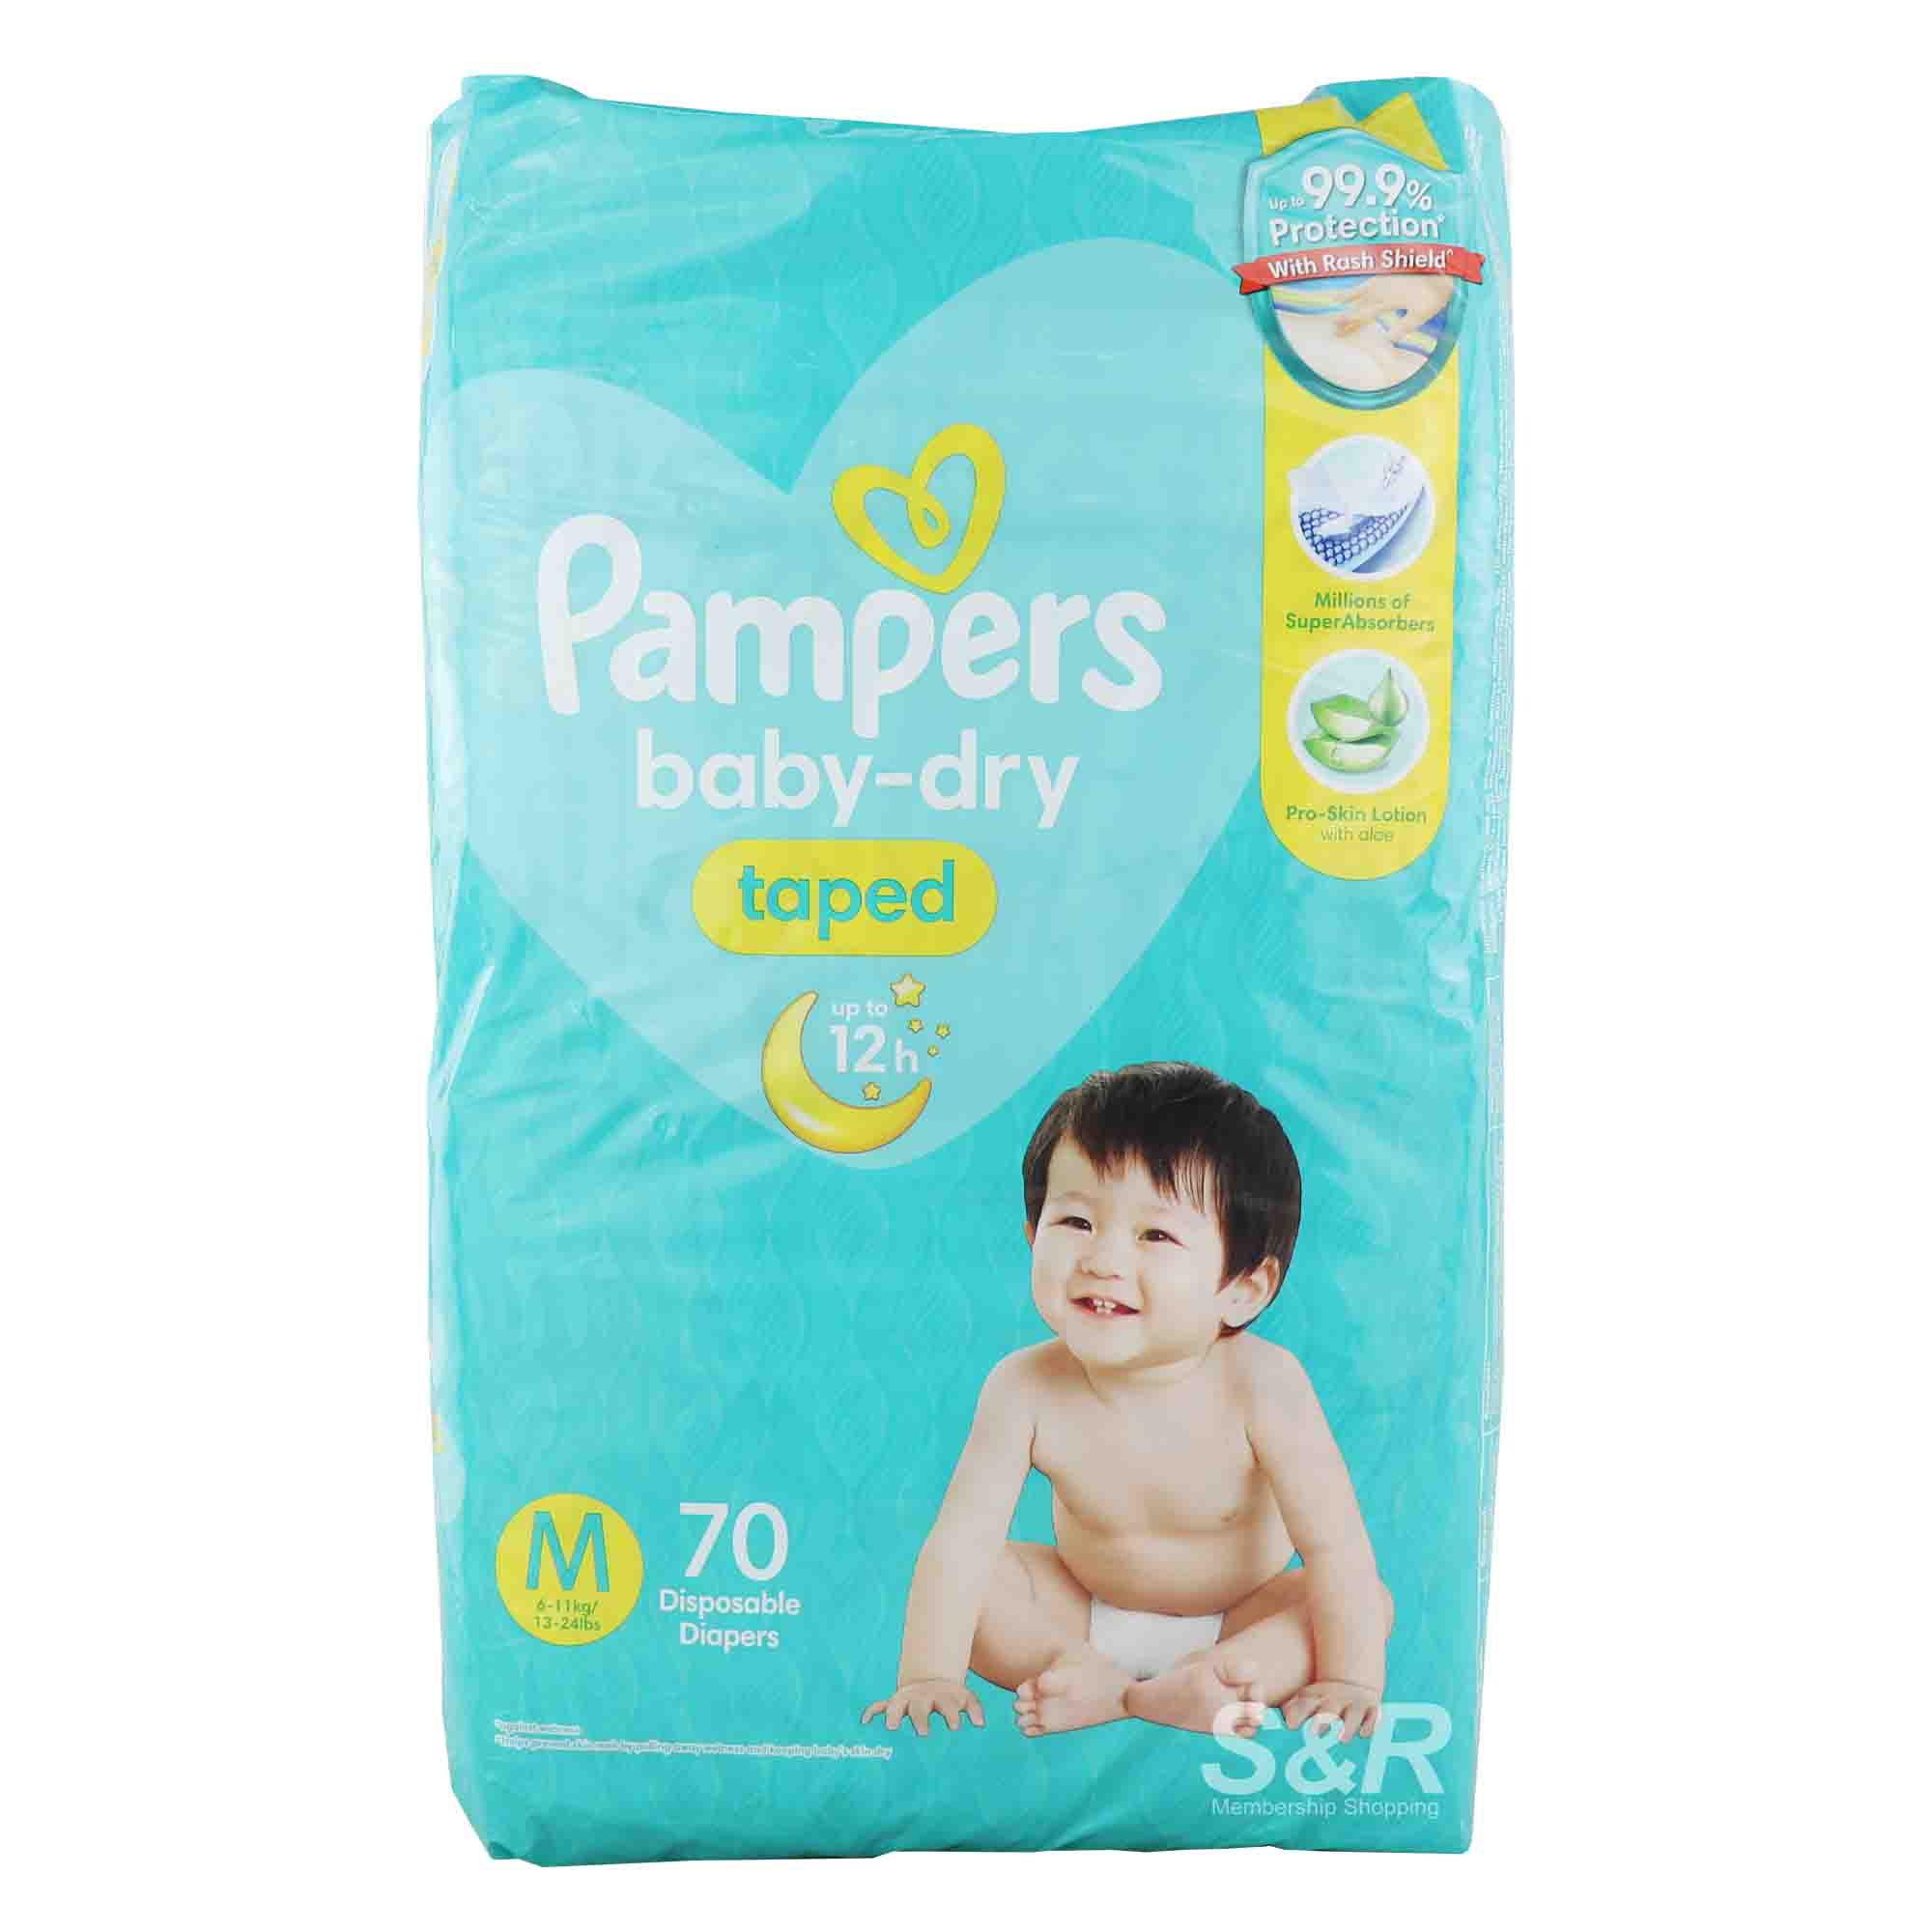 Pampers Baby-dry Medium Taped Disposable Diapers 70pcs